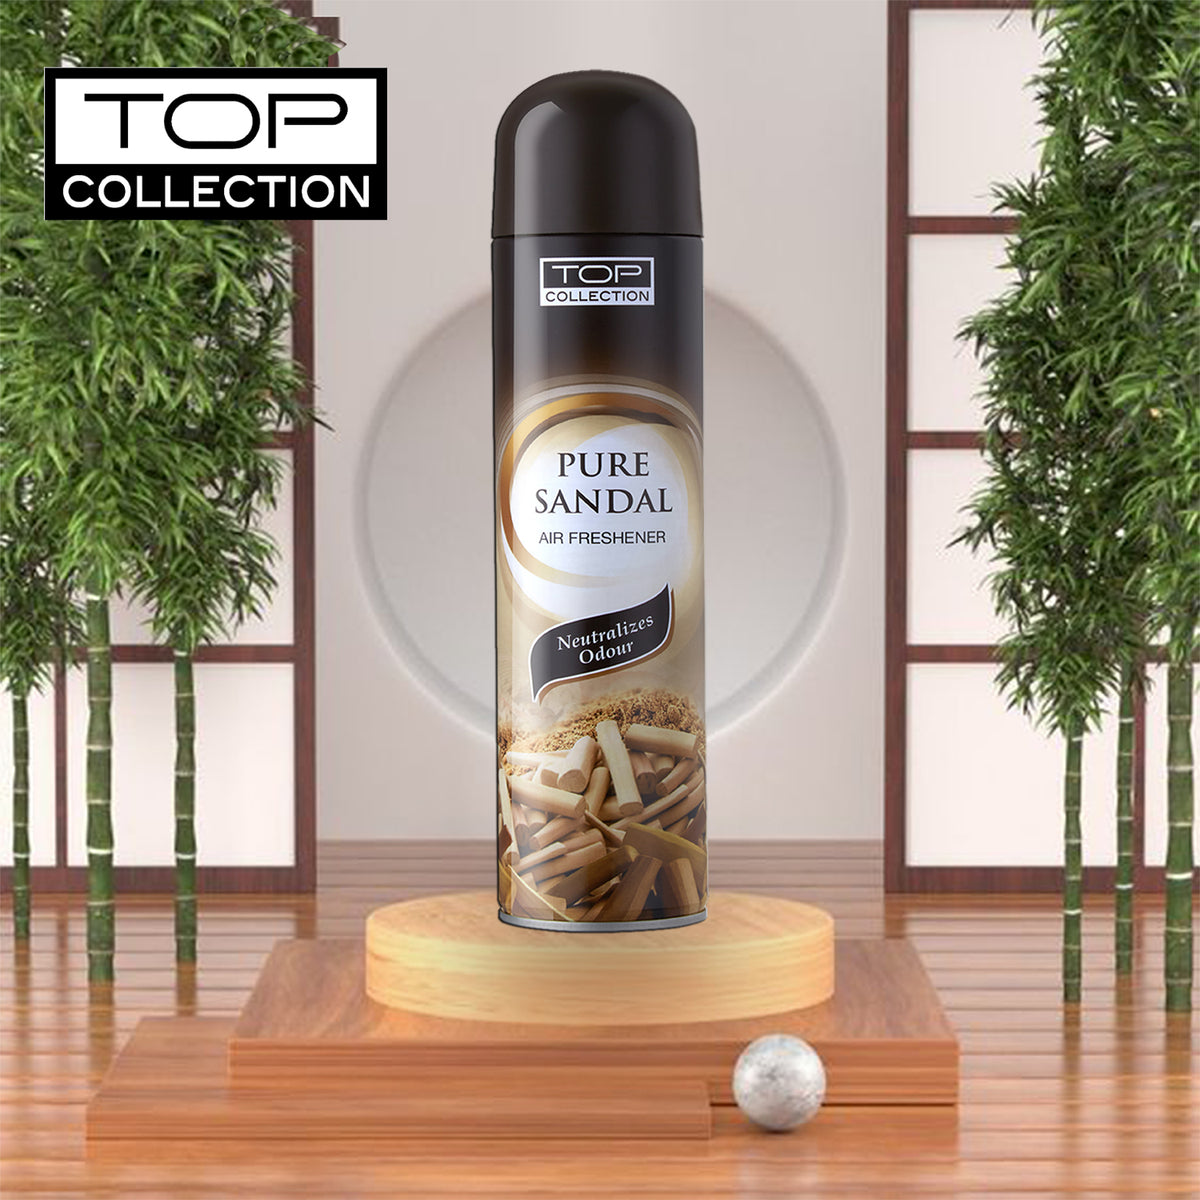 Top Collection Air Freshener - Pure Sandal, 300ml